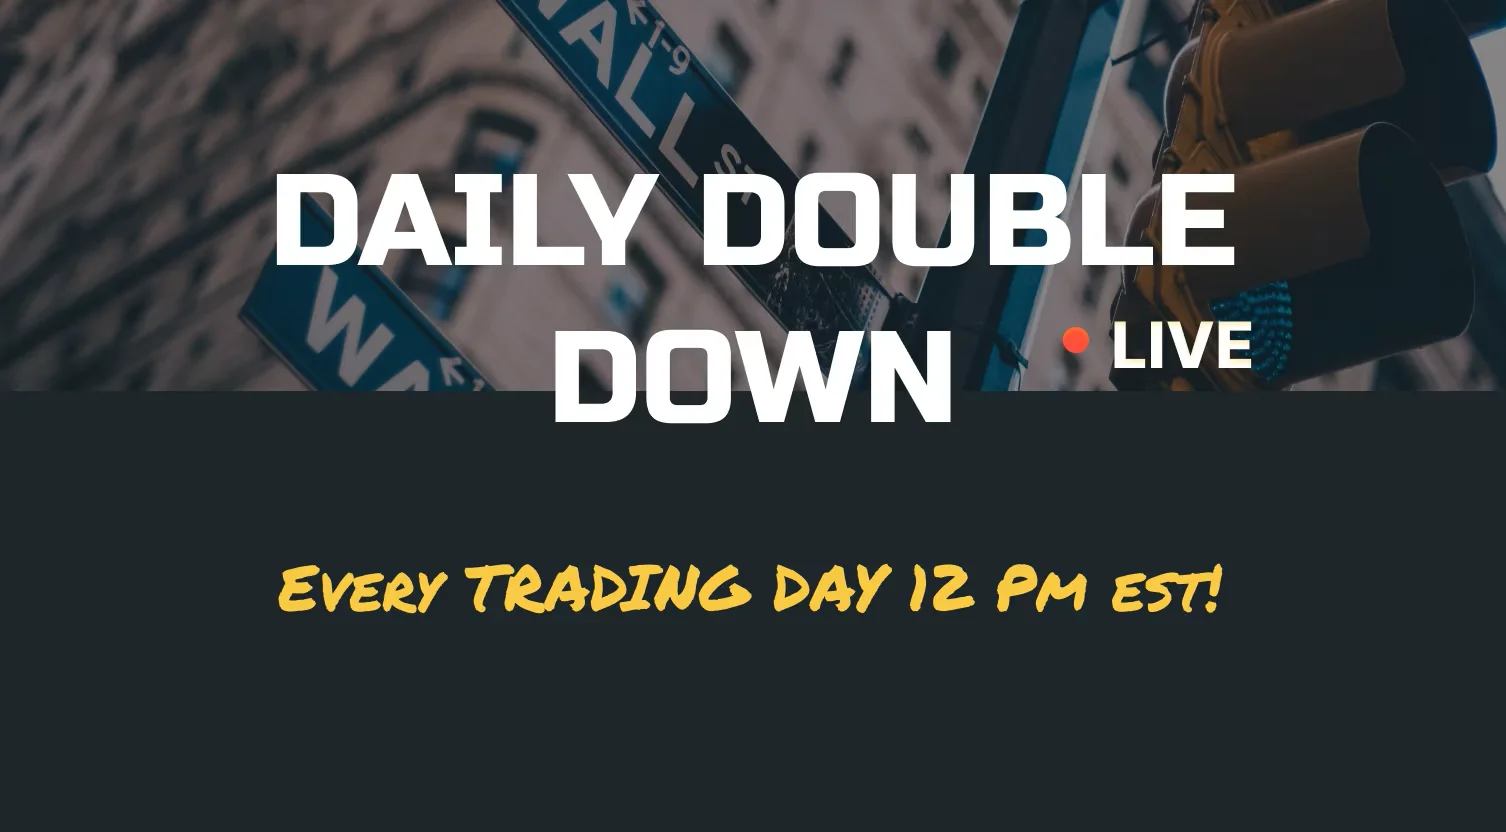 DIT Daily Double Down 12pm EST on Vimeo